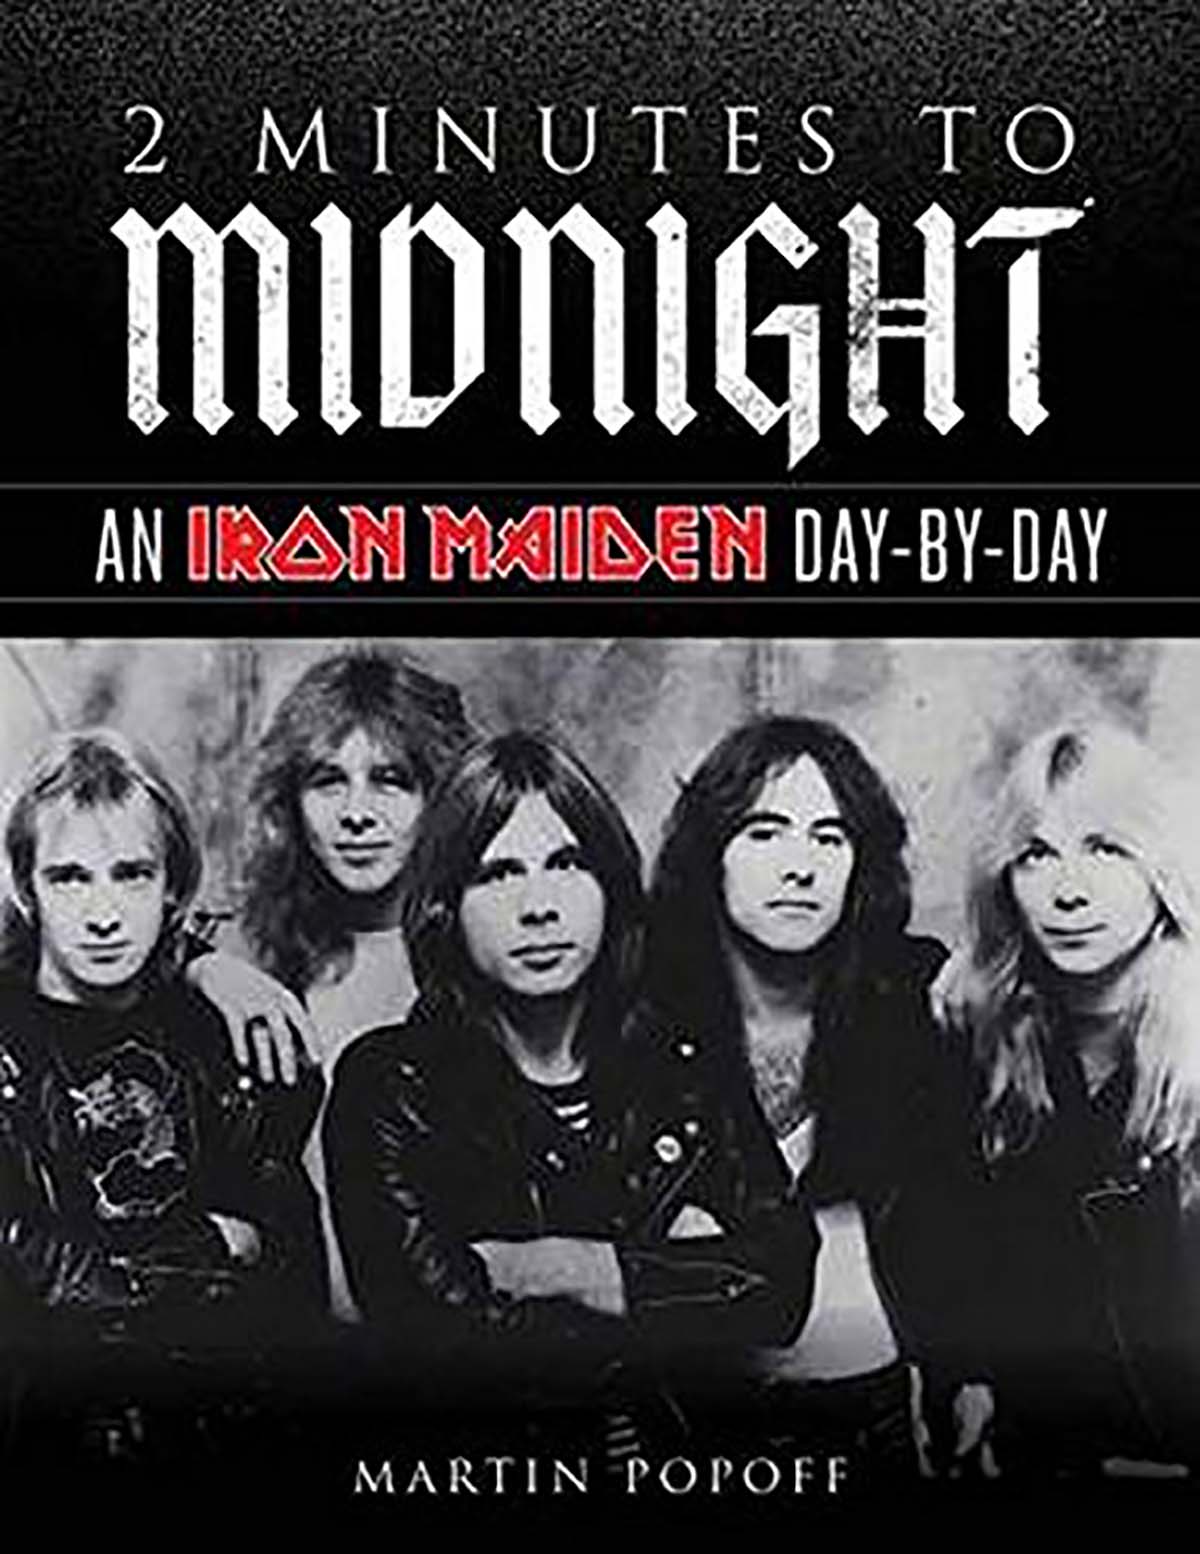 2 Minutes To Midnight - An Iron Maiden Day-By-Day